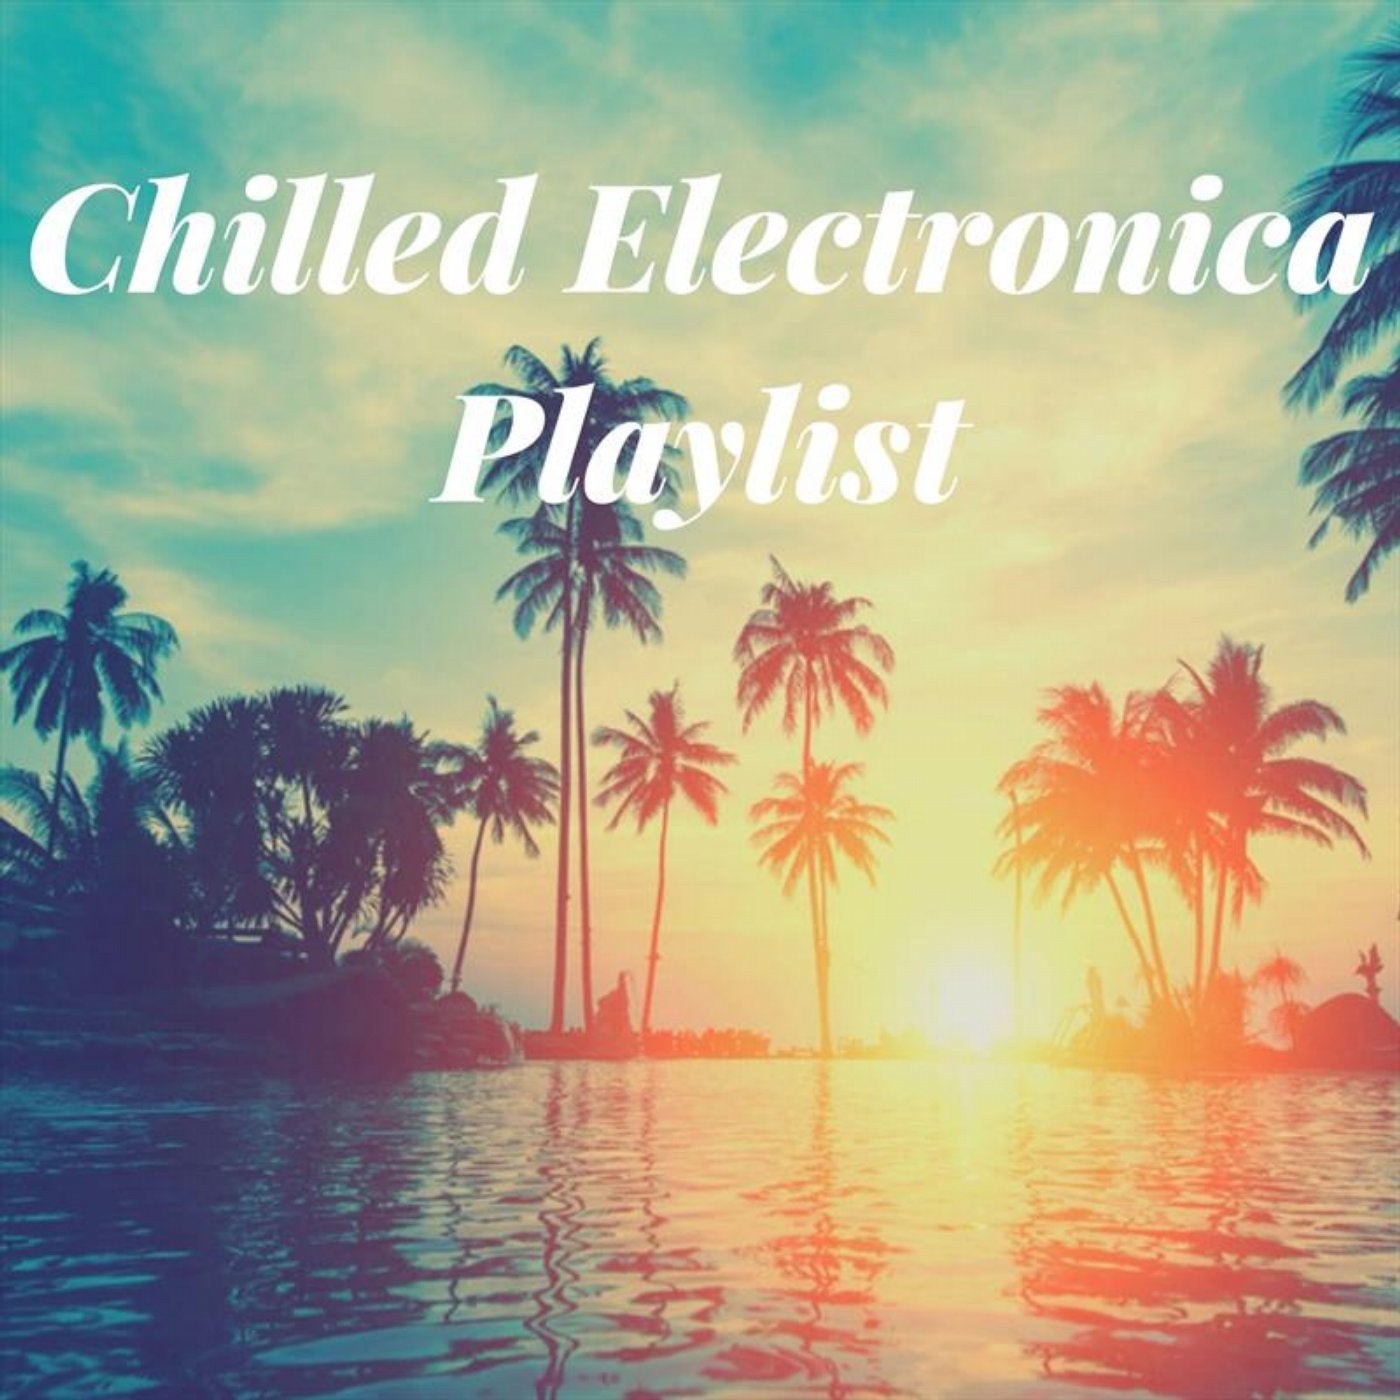 Chilled Electronica Playlist